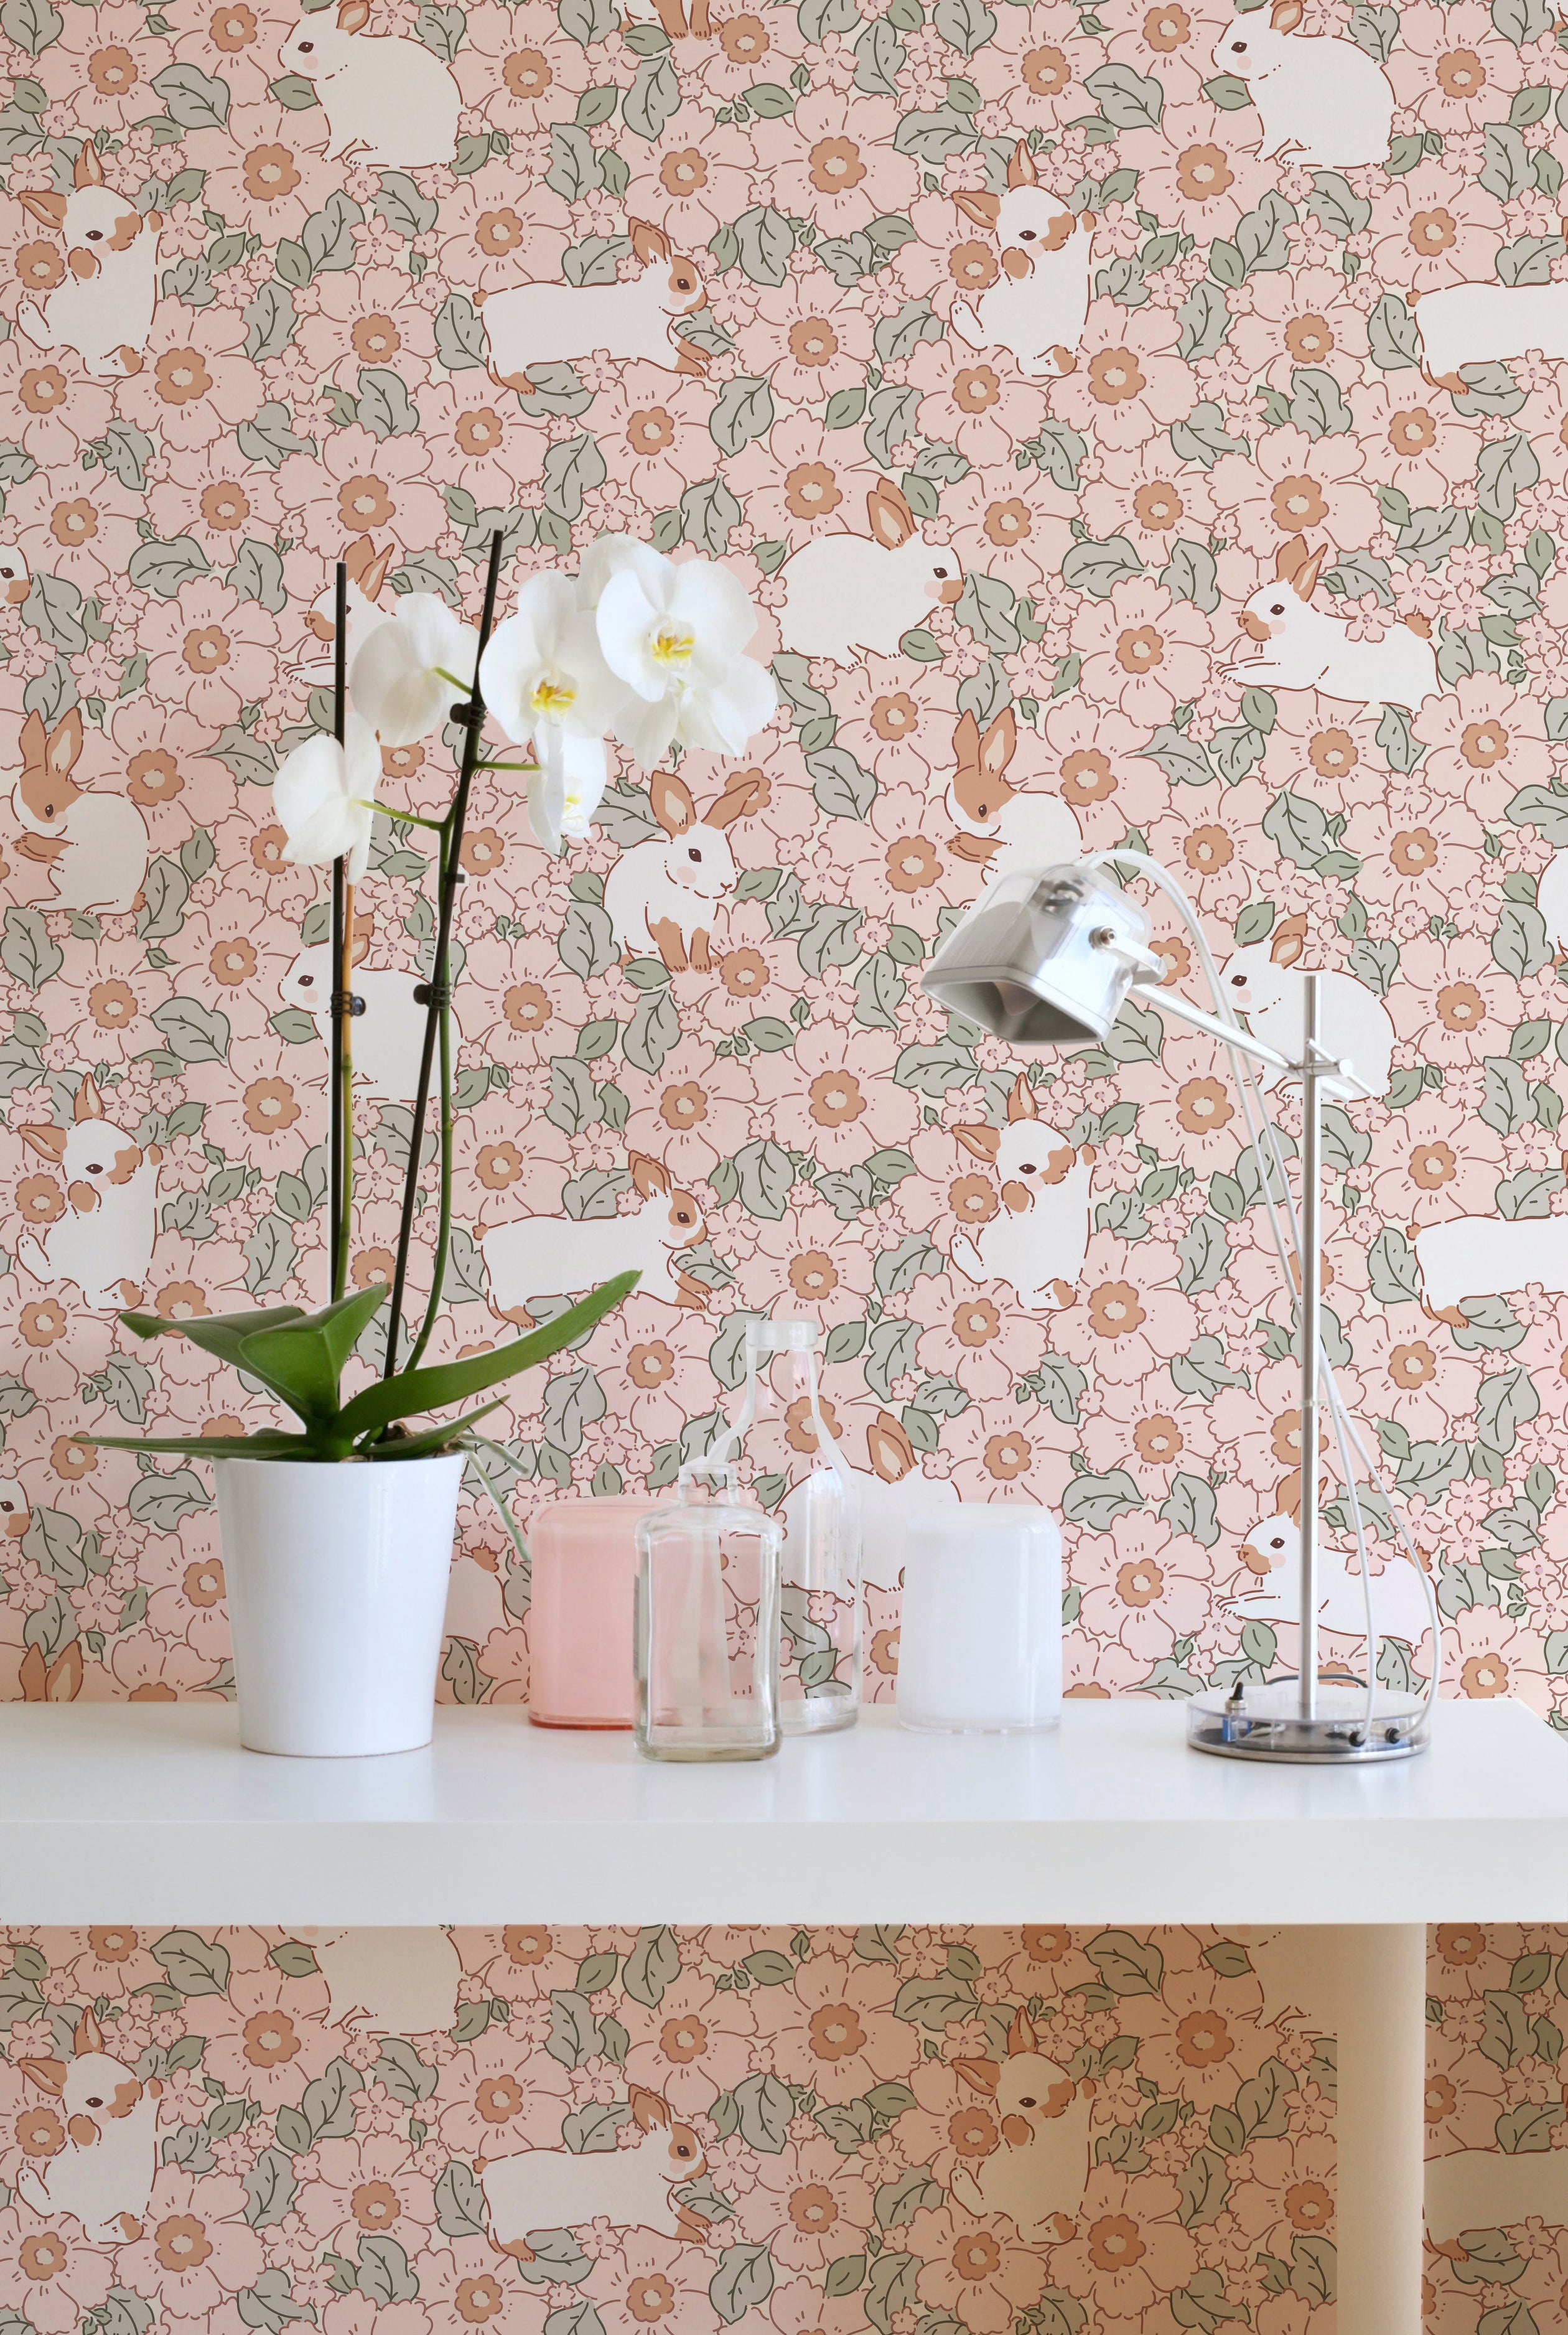 A bright workspace is enhanced by the Petite Lapinou Wallpaper, displaying a delightful pattern of white rabbits and floral motifs in soft pink and green. The desk is adorned with a white orchid, modern lamp, and minimalist accessories, creating a peaceful and stylish area for creativity.